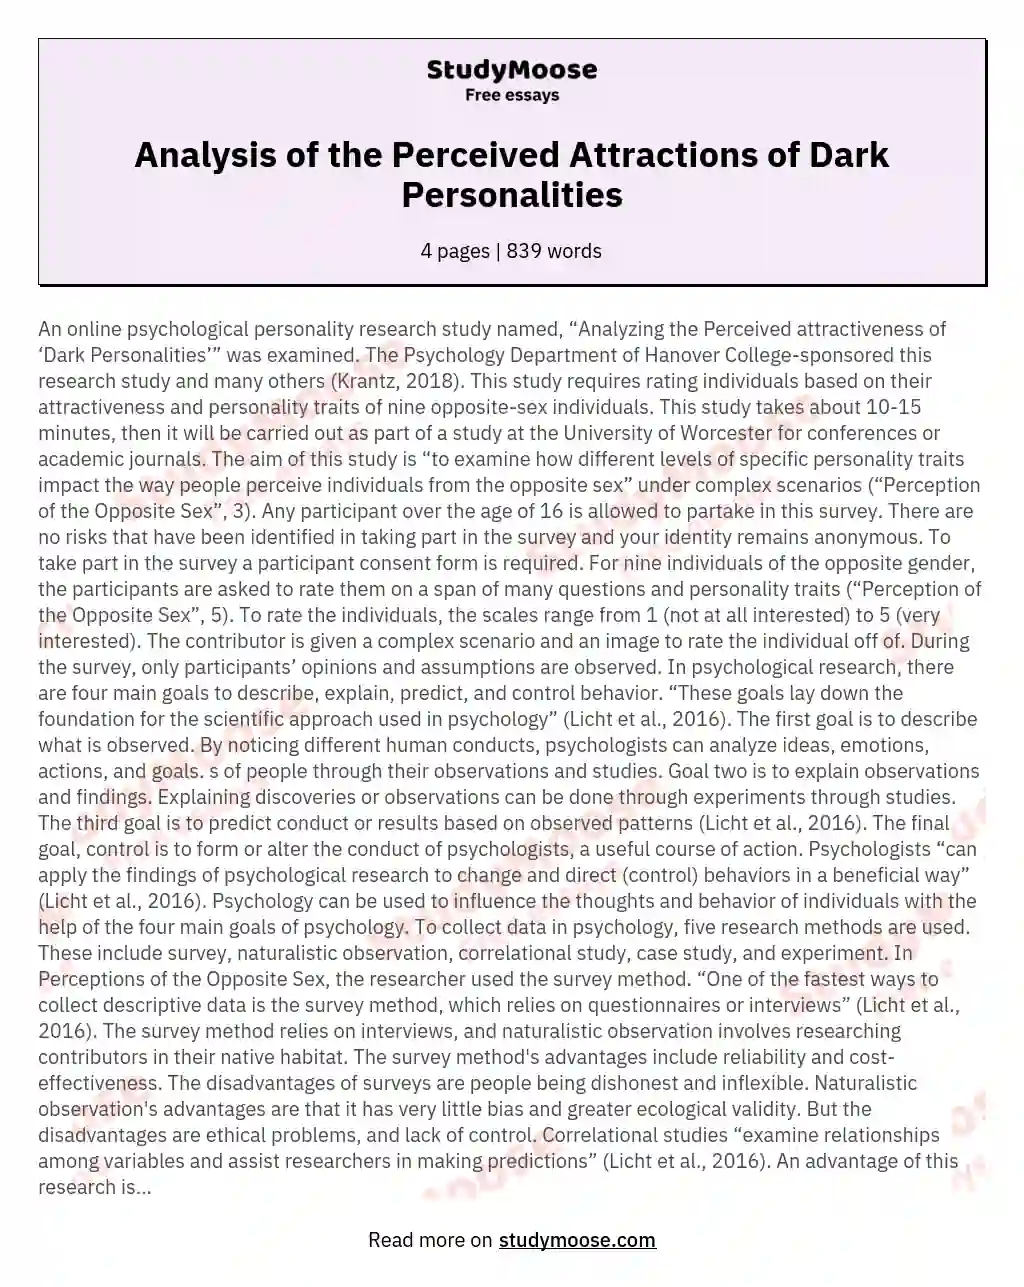 Analysis of the Perceived Attractions of Dark Personalities essay